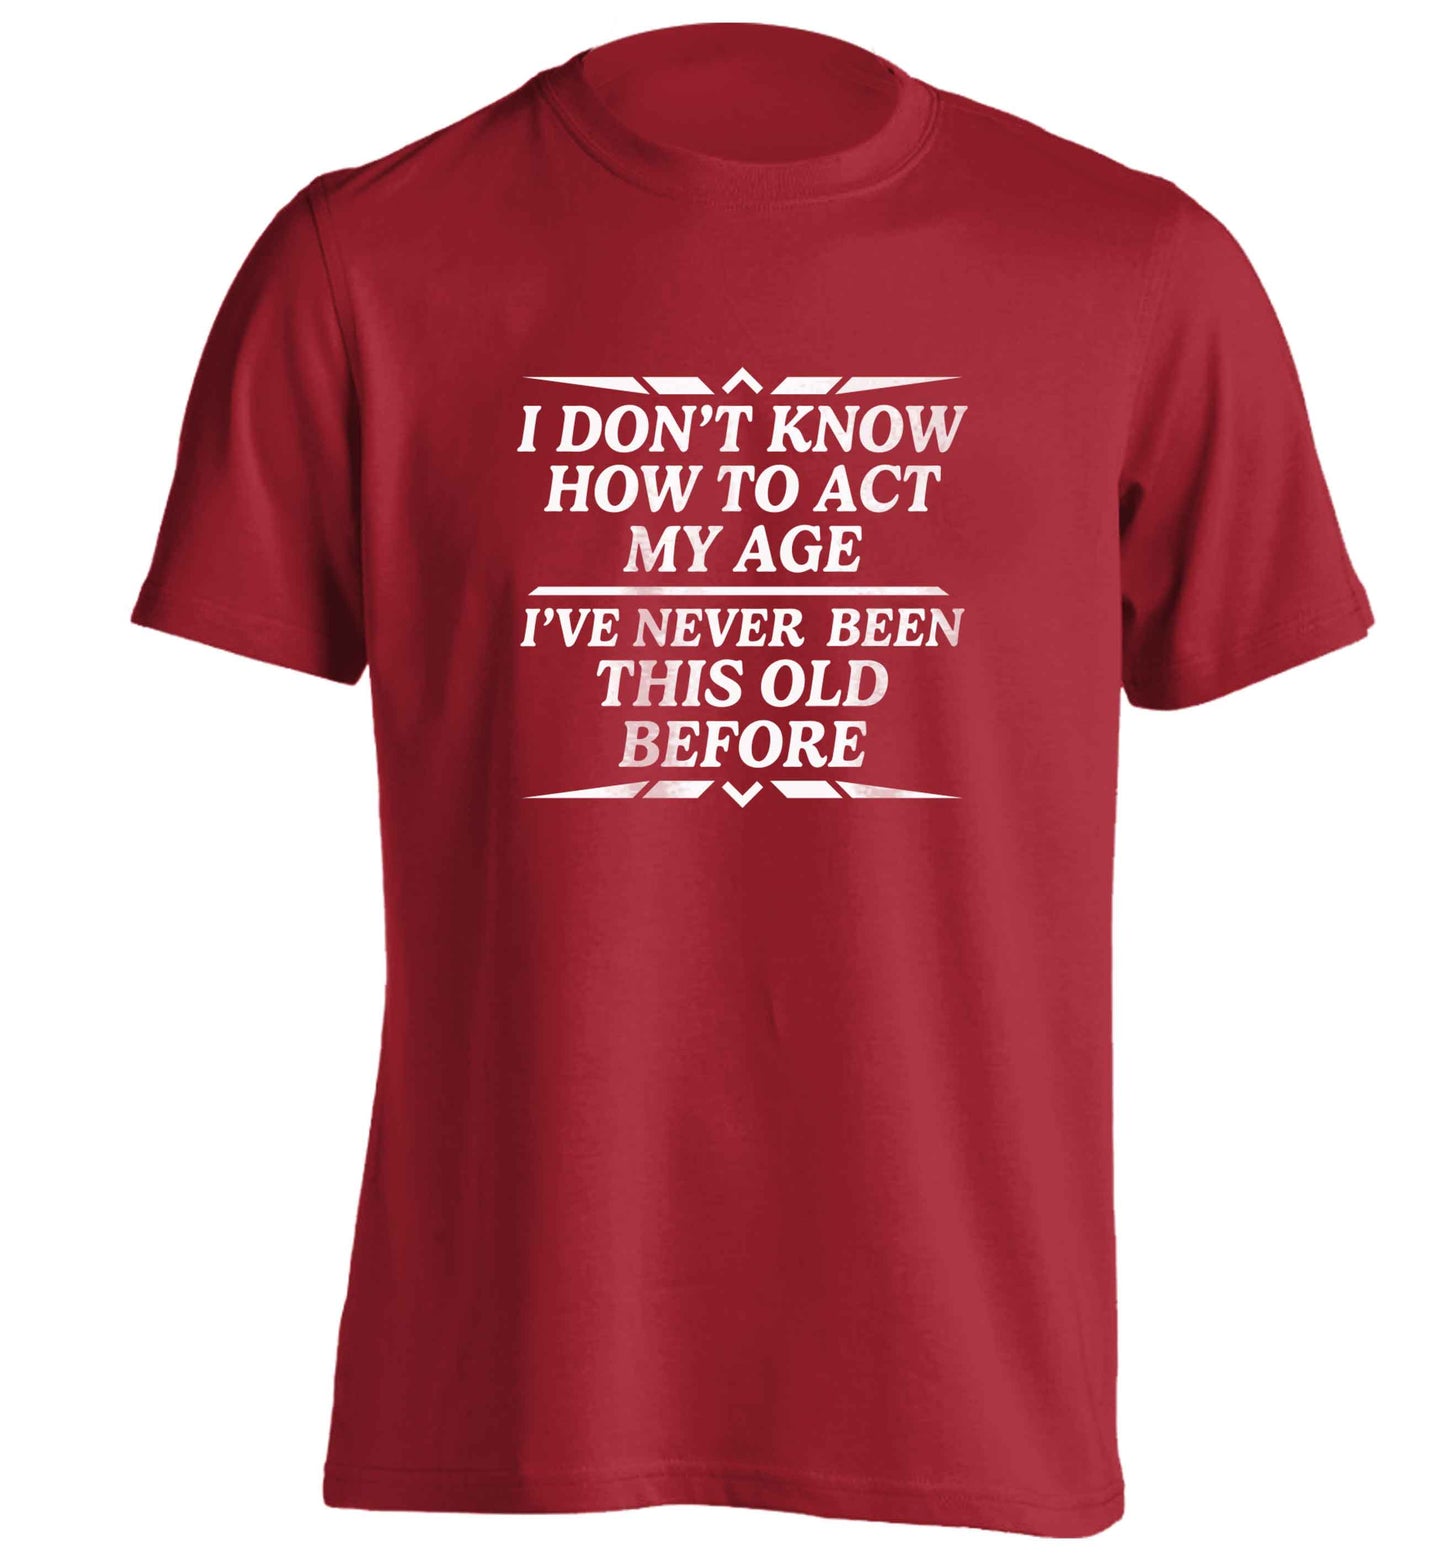 I don't know how to act my age I've never been this old before adults unisex red Tshirt 2XL